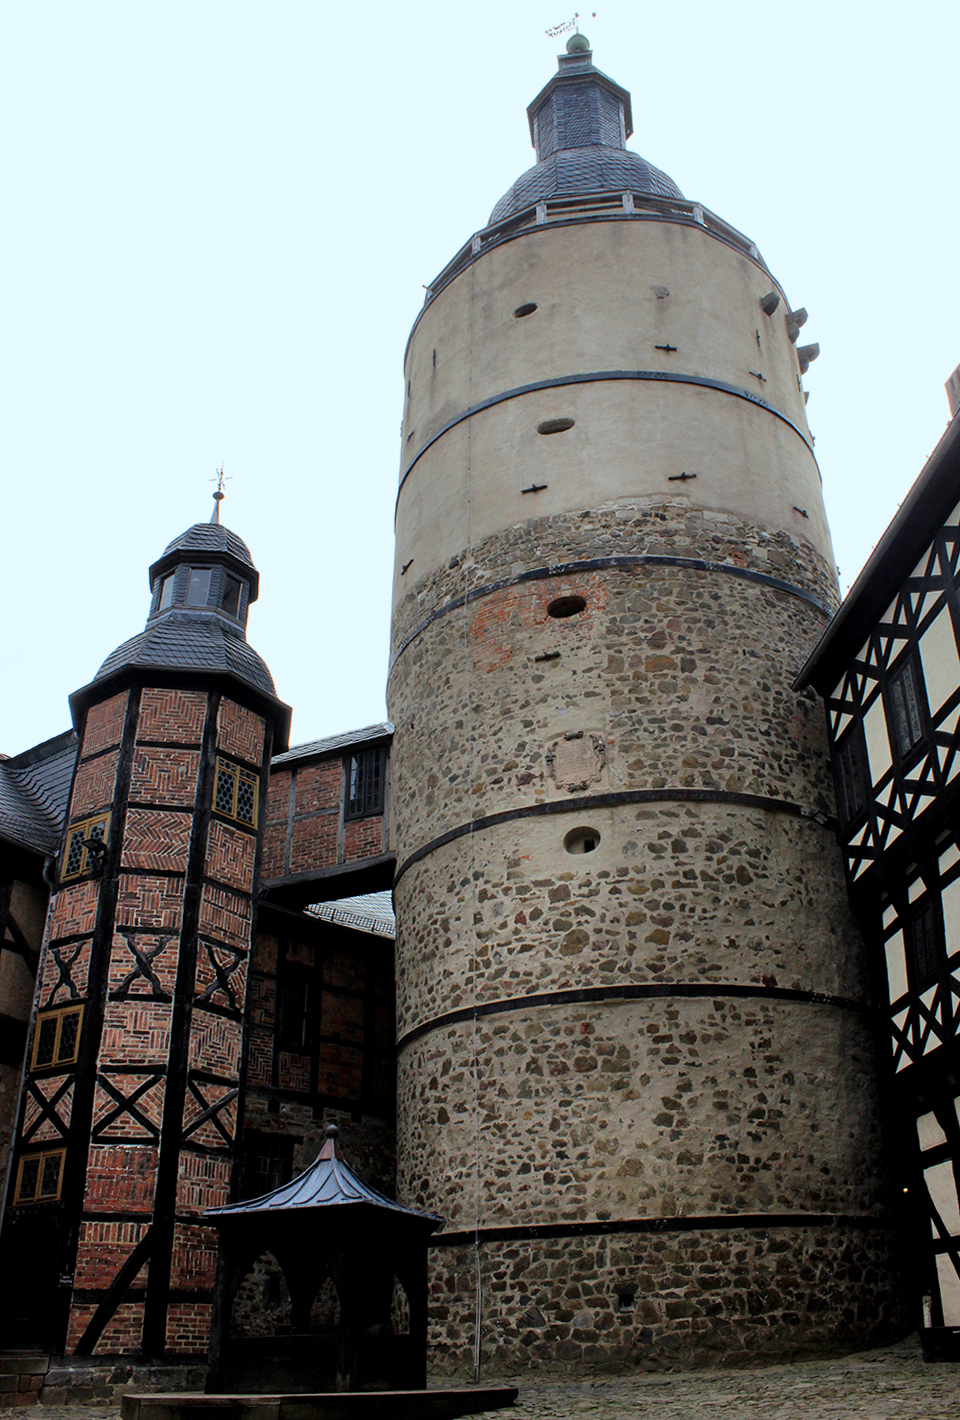 View of the keep from the courtyard: built in 1200, its walls were raised in the 16th century under Augustus I von der Asseburg. Approx. 31 metres high